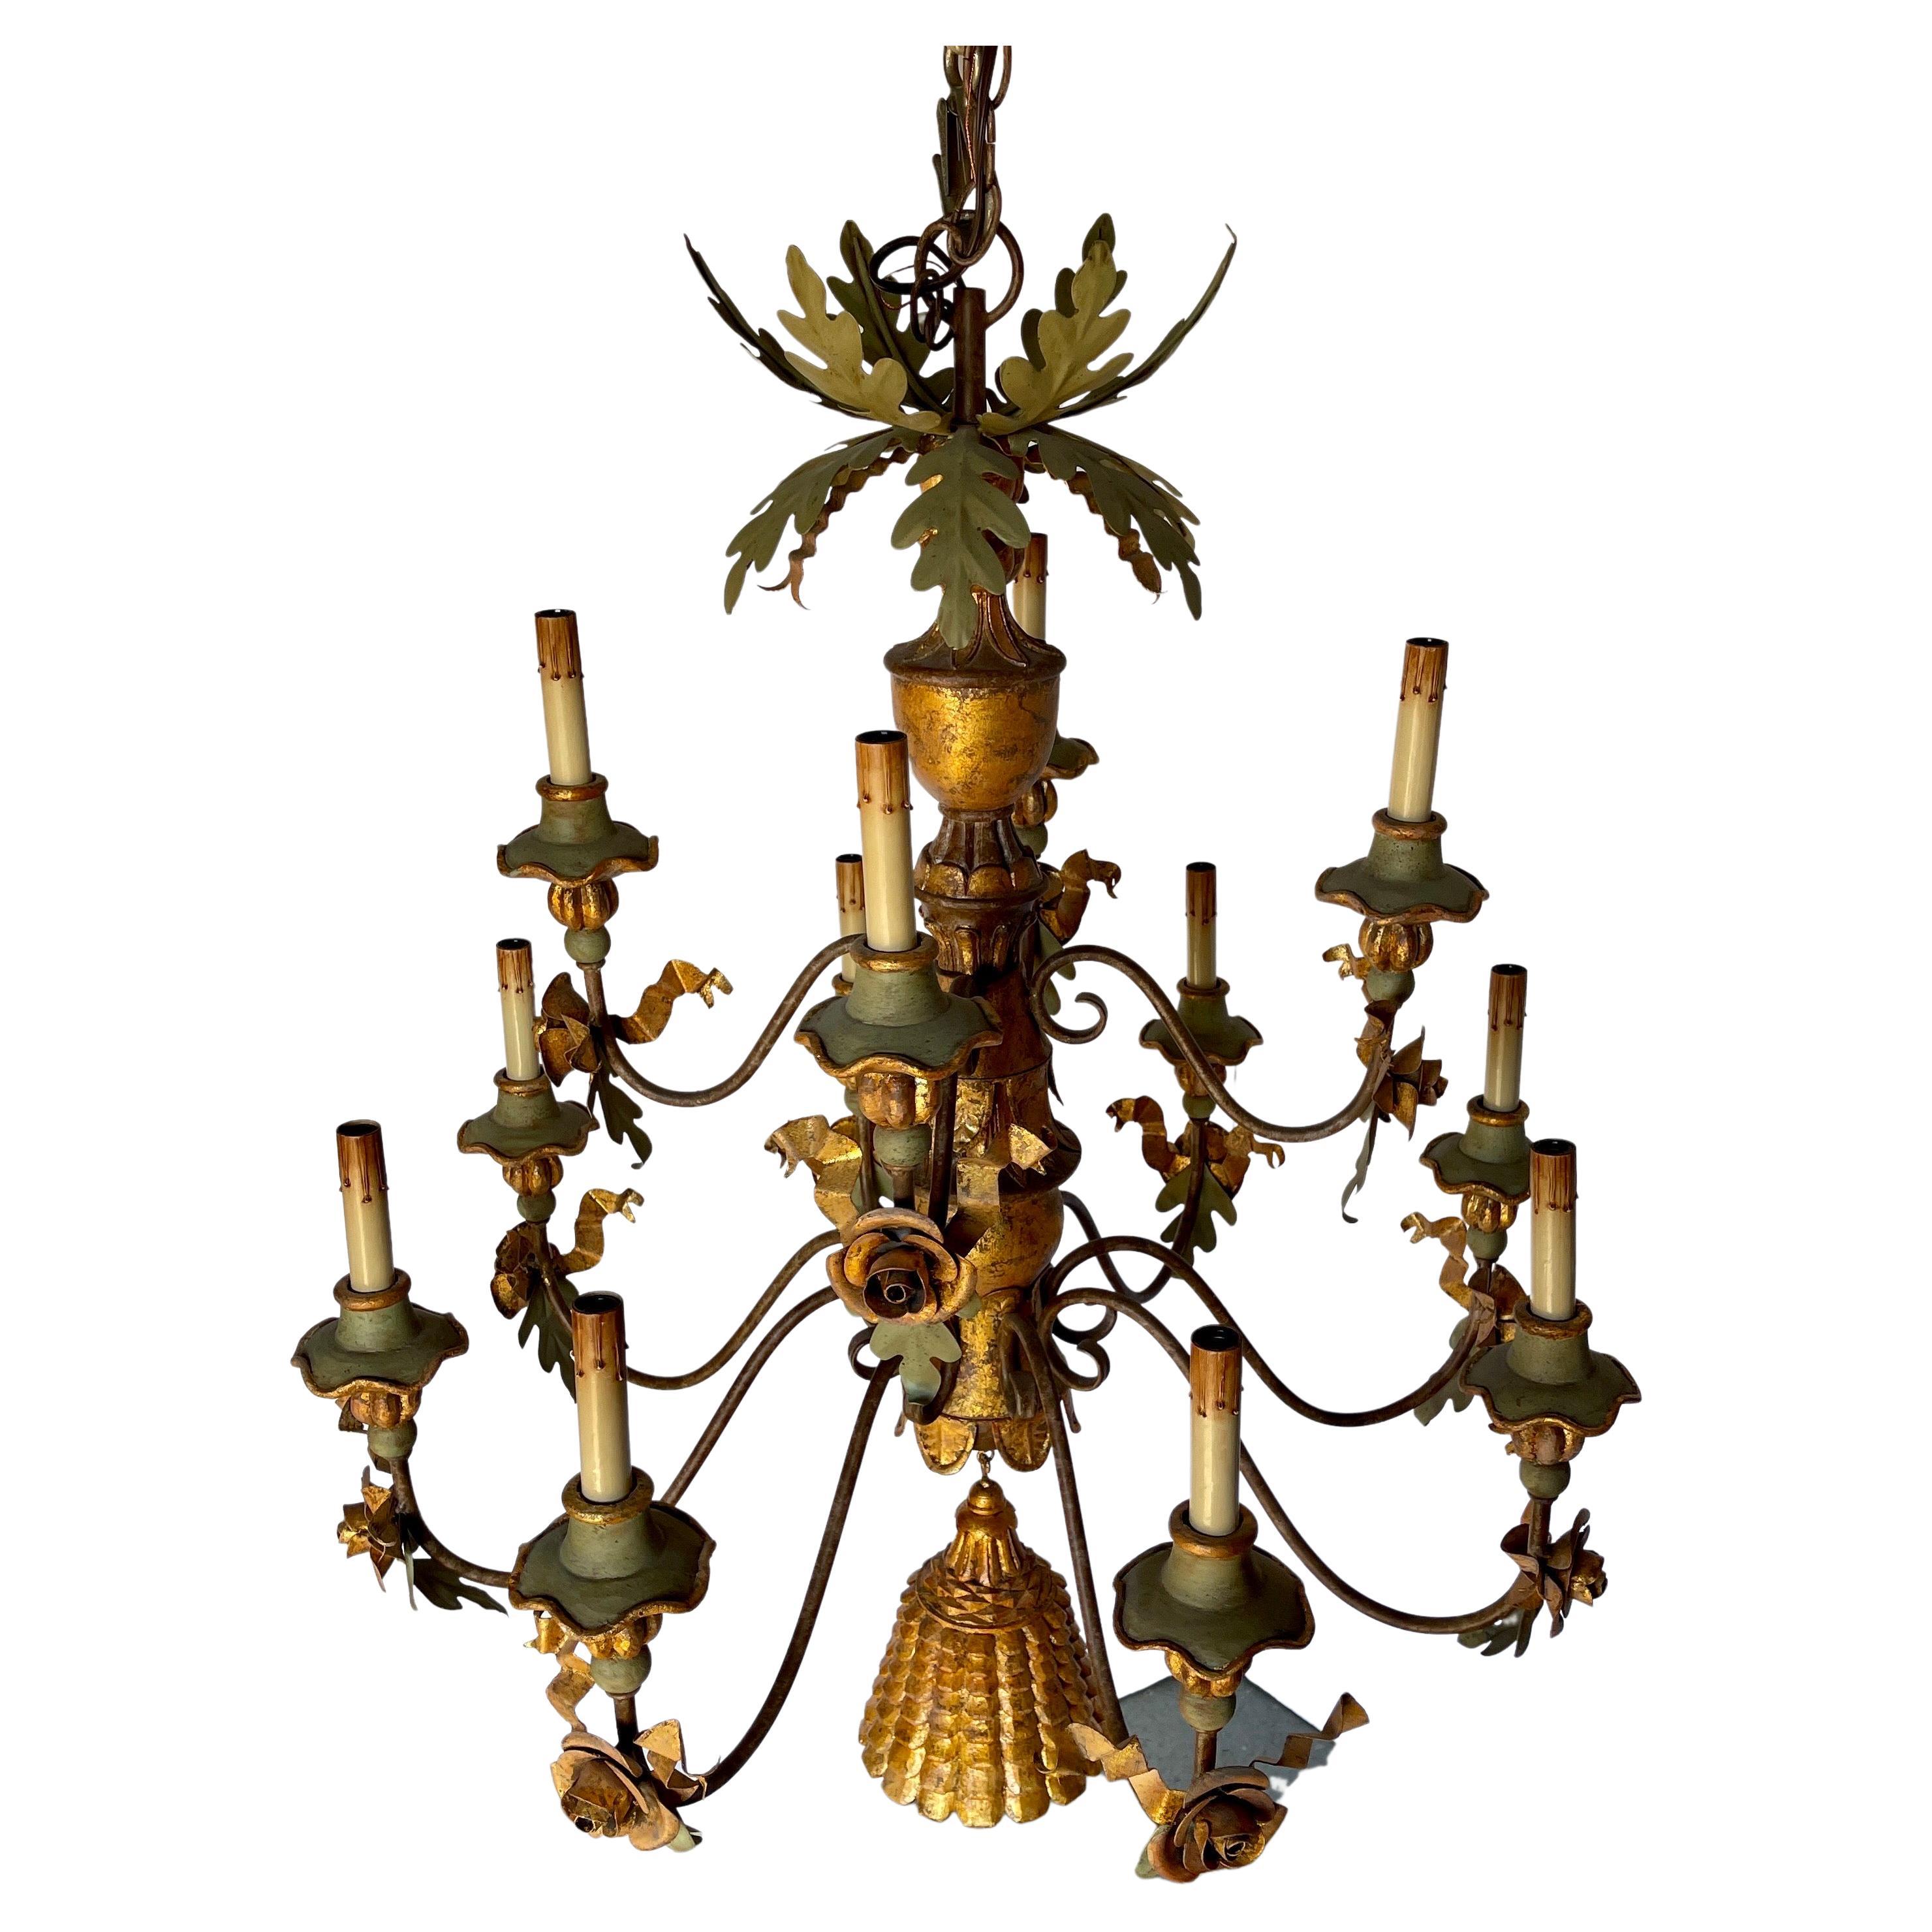 Green and Gilt Wood Chandelier in Iron with Flower Details and Large Gilt Tassel

Exceptional 12 light chandelier featuring gilt foliate, tole decoration, metal green oak leaves and flowers. Large carved hanging tassel compliments the look of this